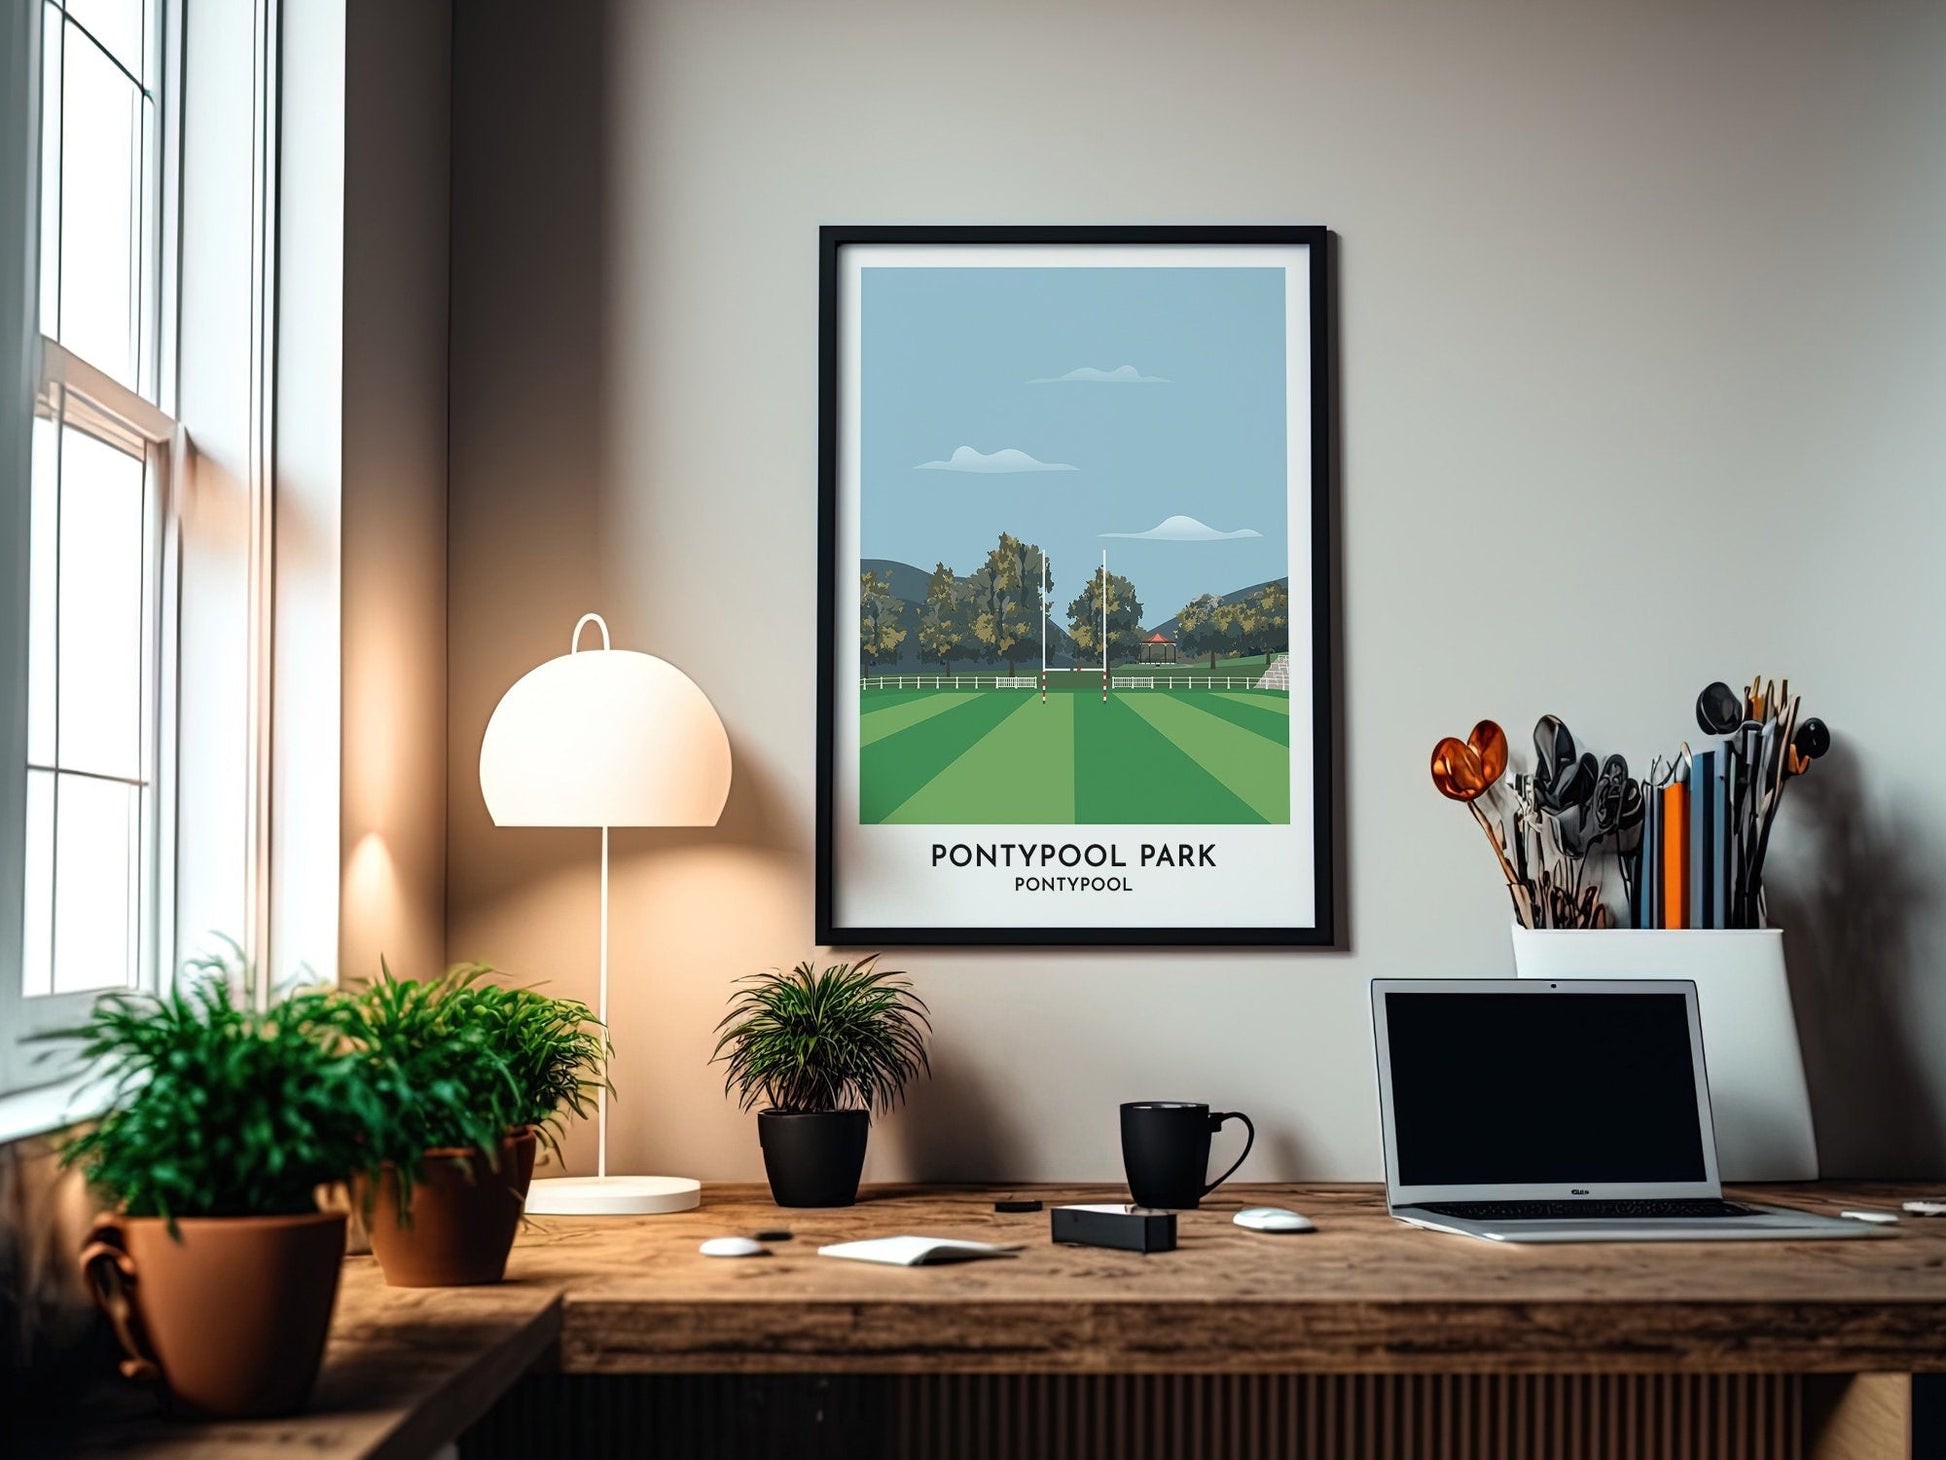 Pontypool Rugby Ground Print, Pontypool Park Wales Illustration Poster, Rugby Presents for Him or Her - Turf Football Art